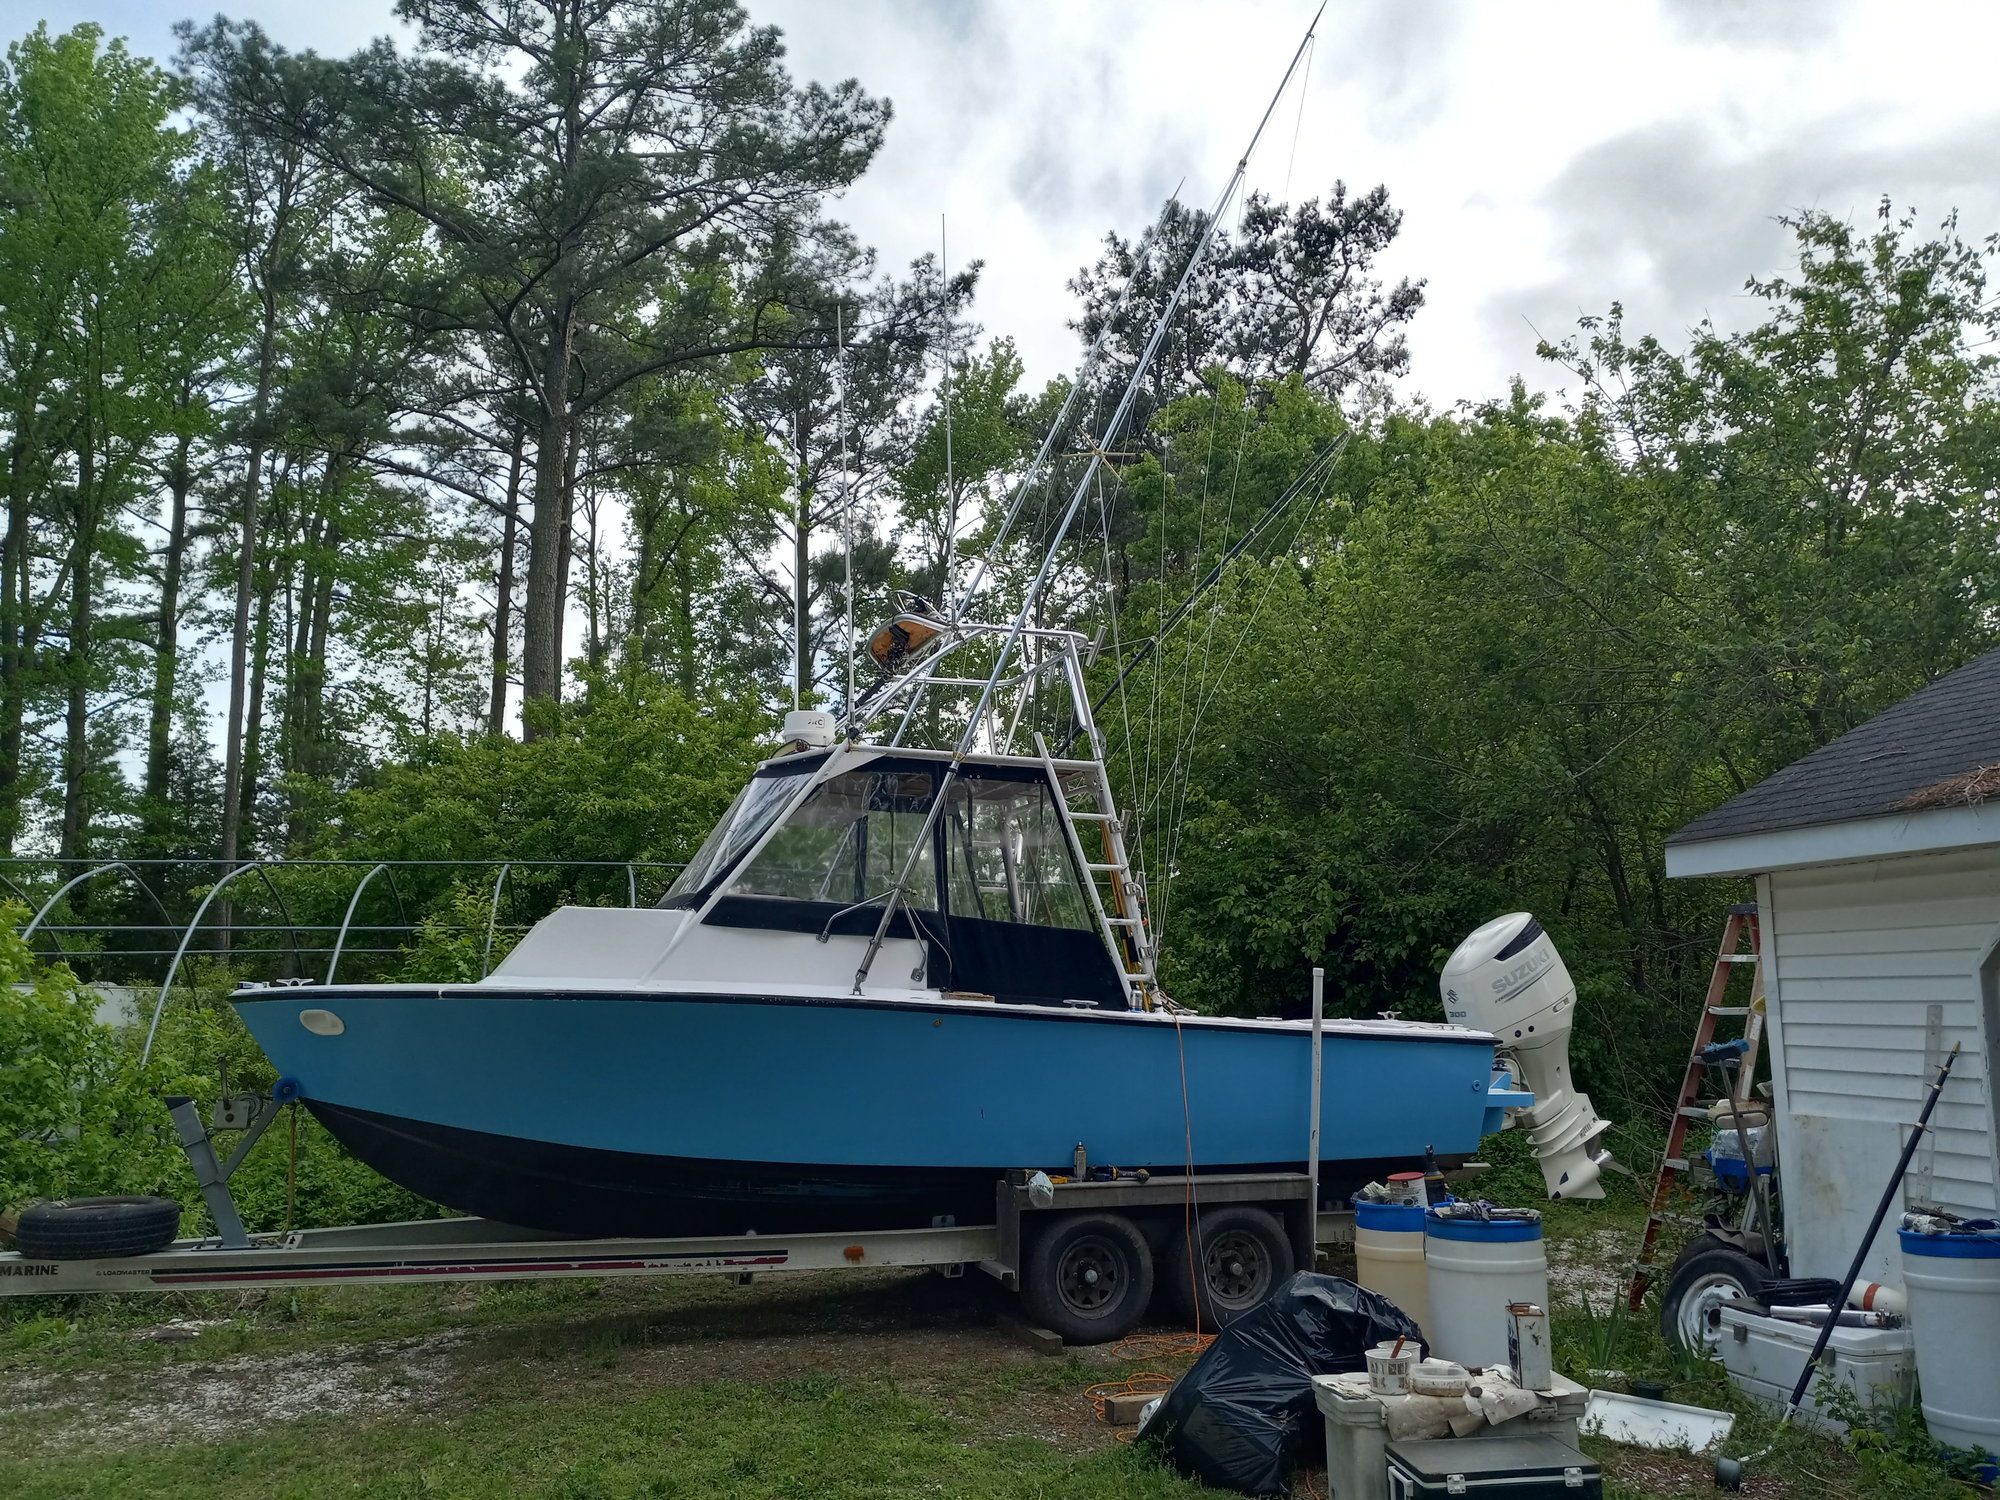 Let's see some pics of your ride. - The Hull Truth - Boating and Fishing  Forum